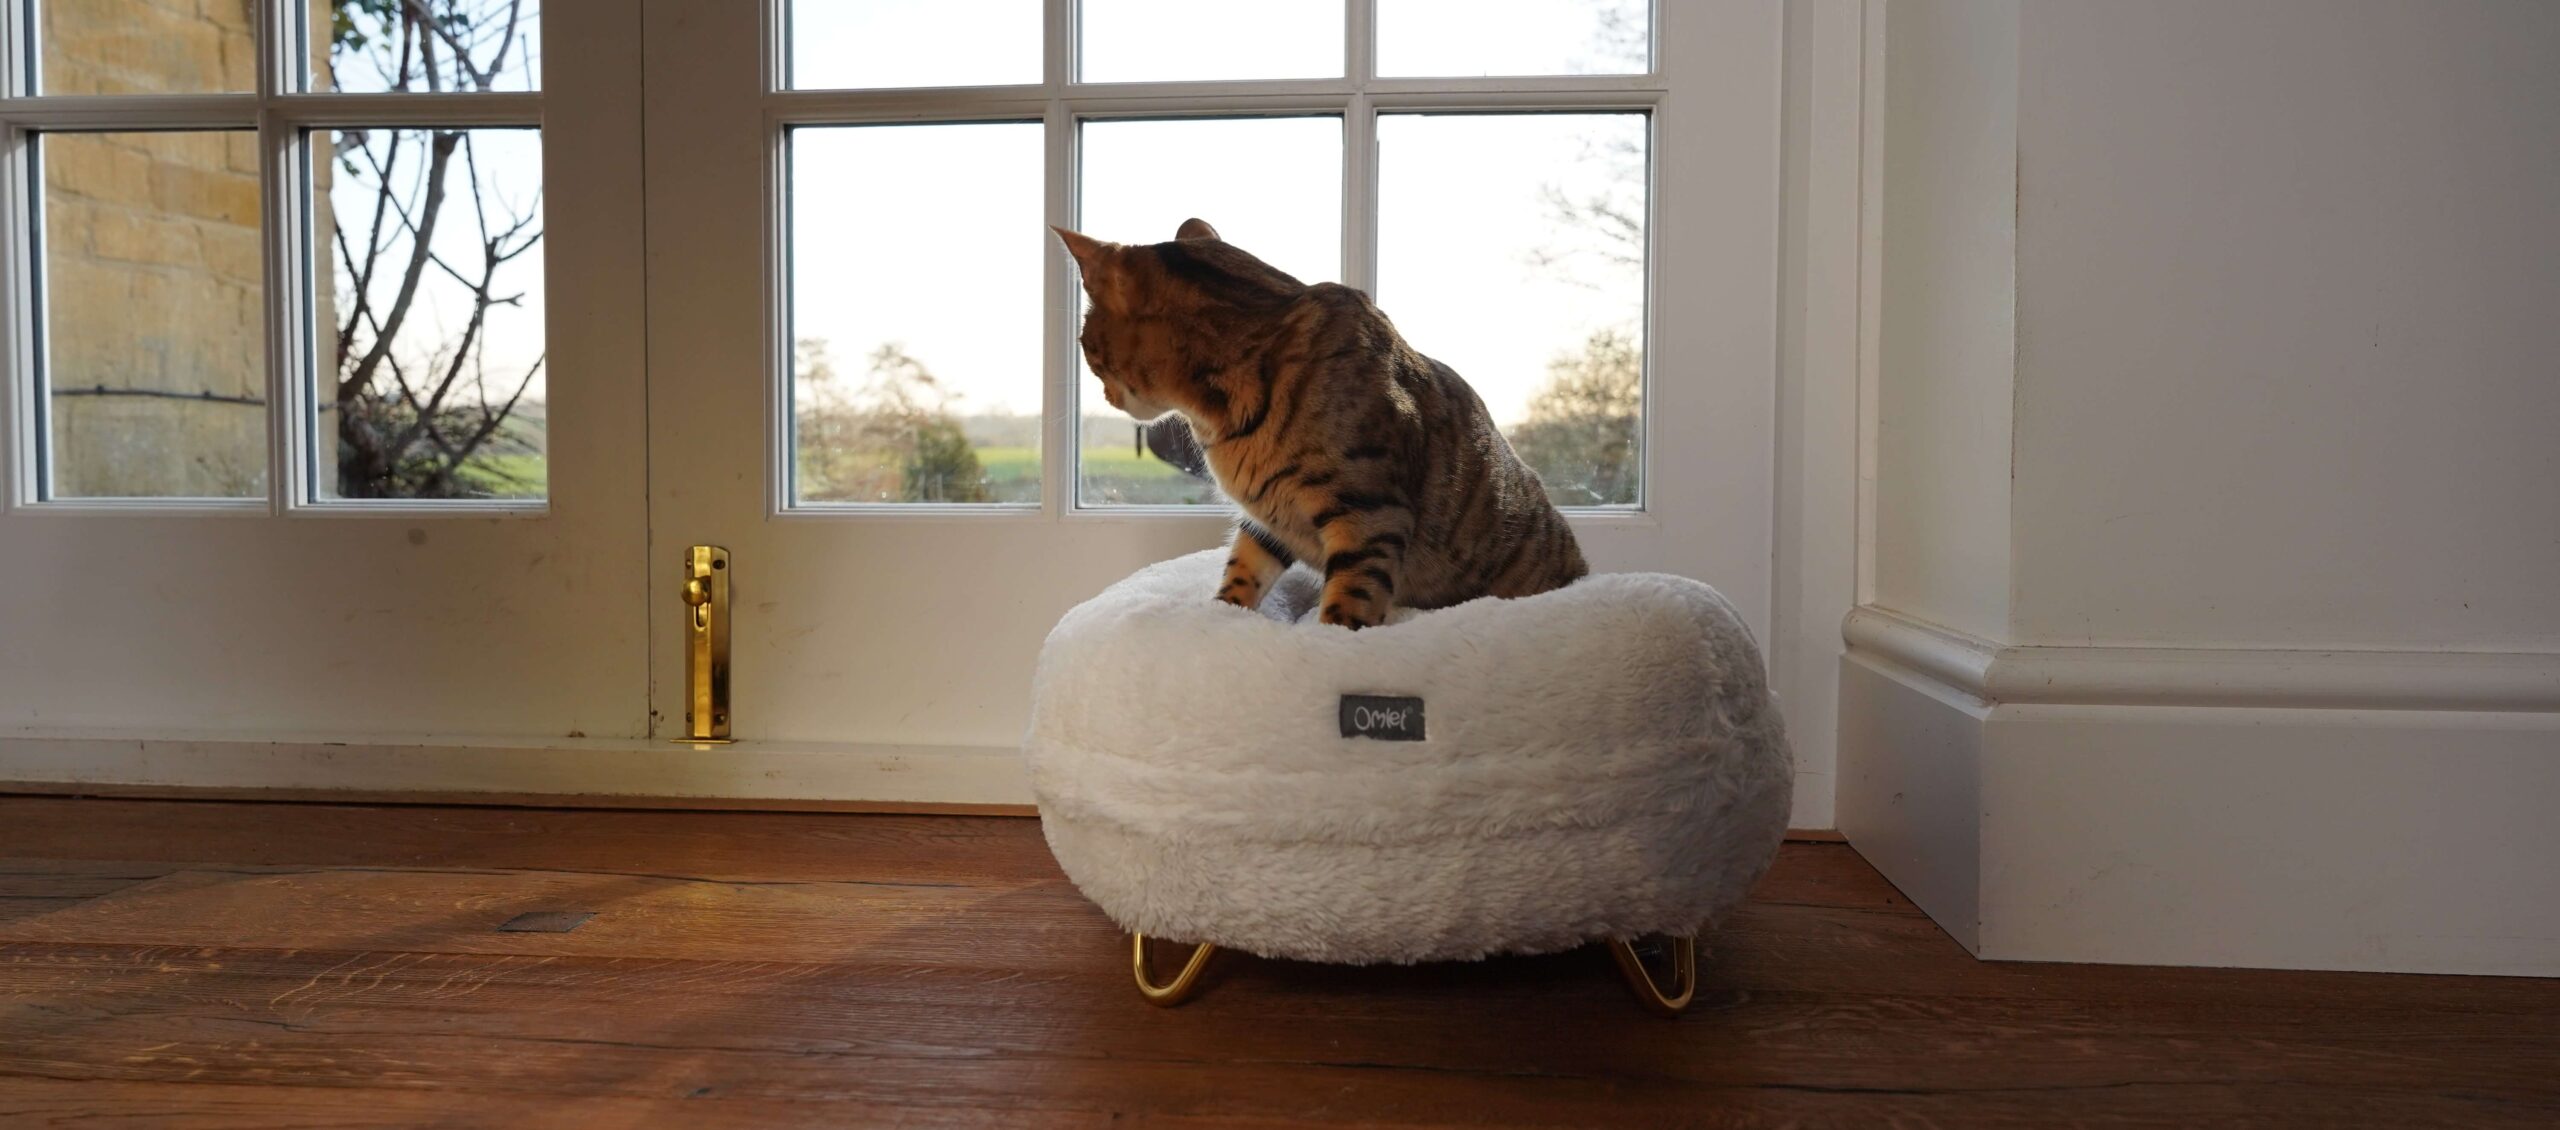 Cat sitting on white maya donut cat bed looking out of the window